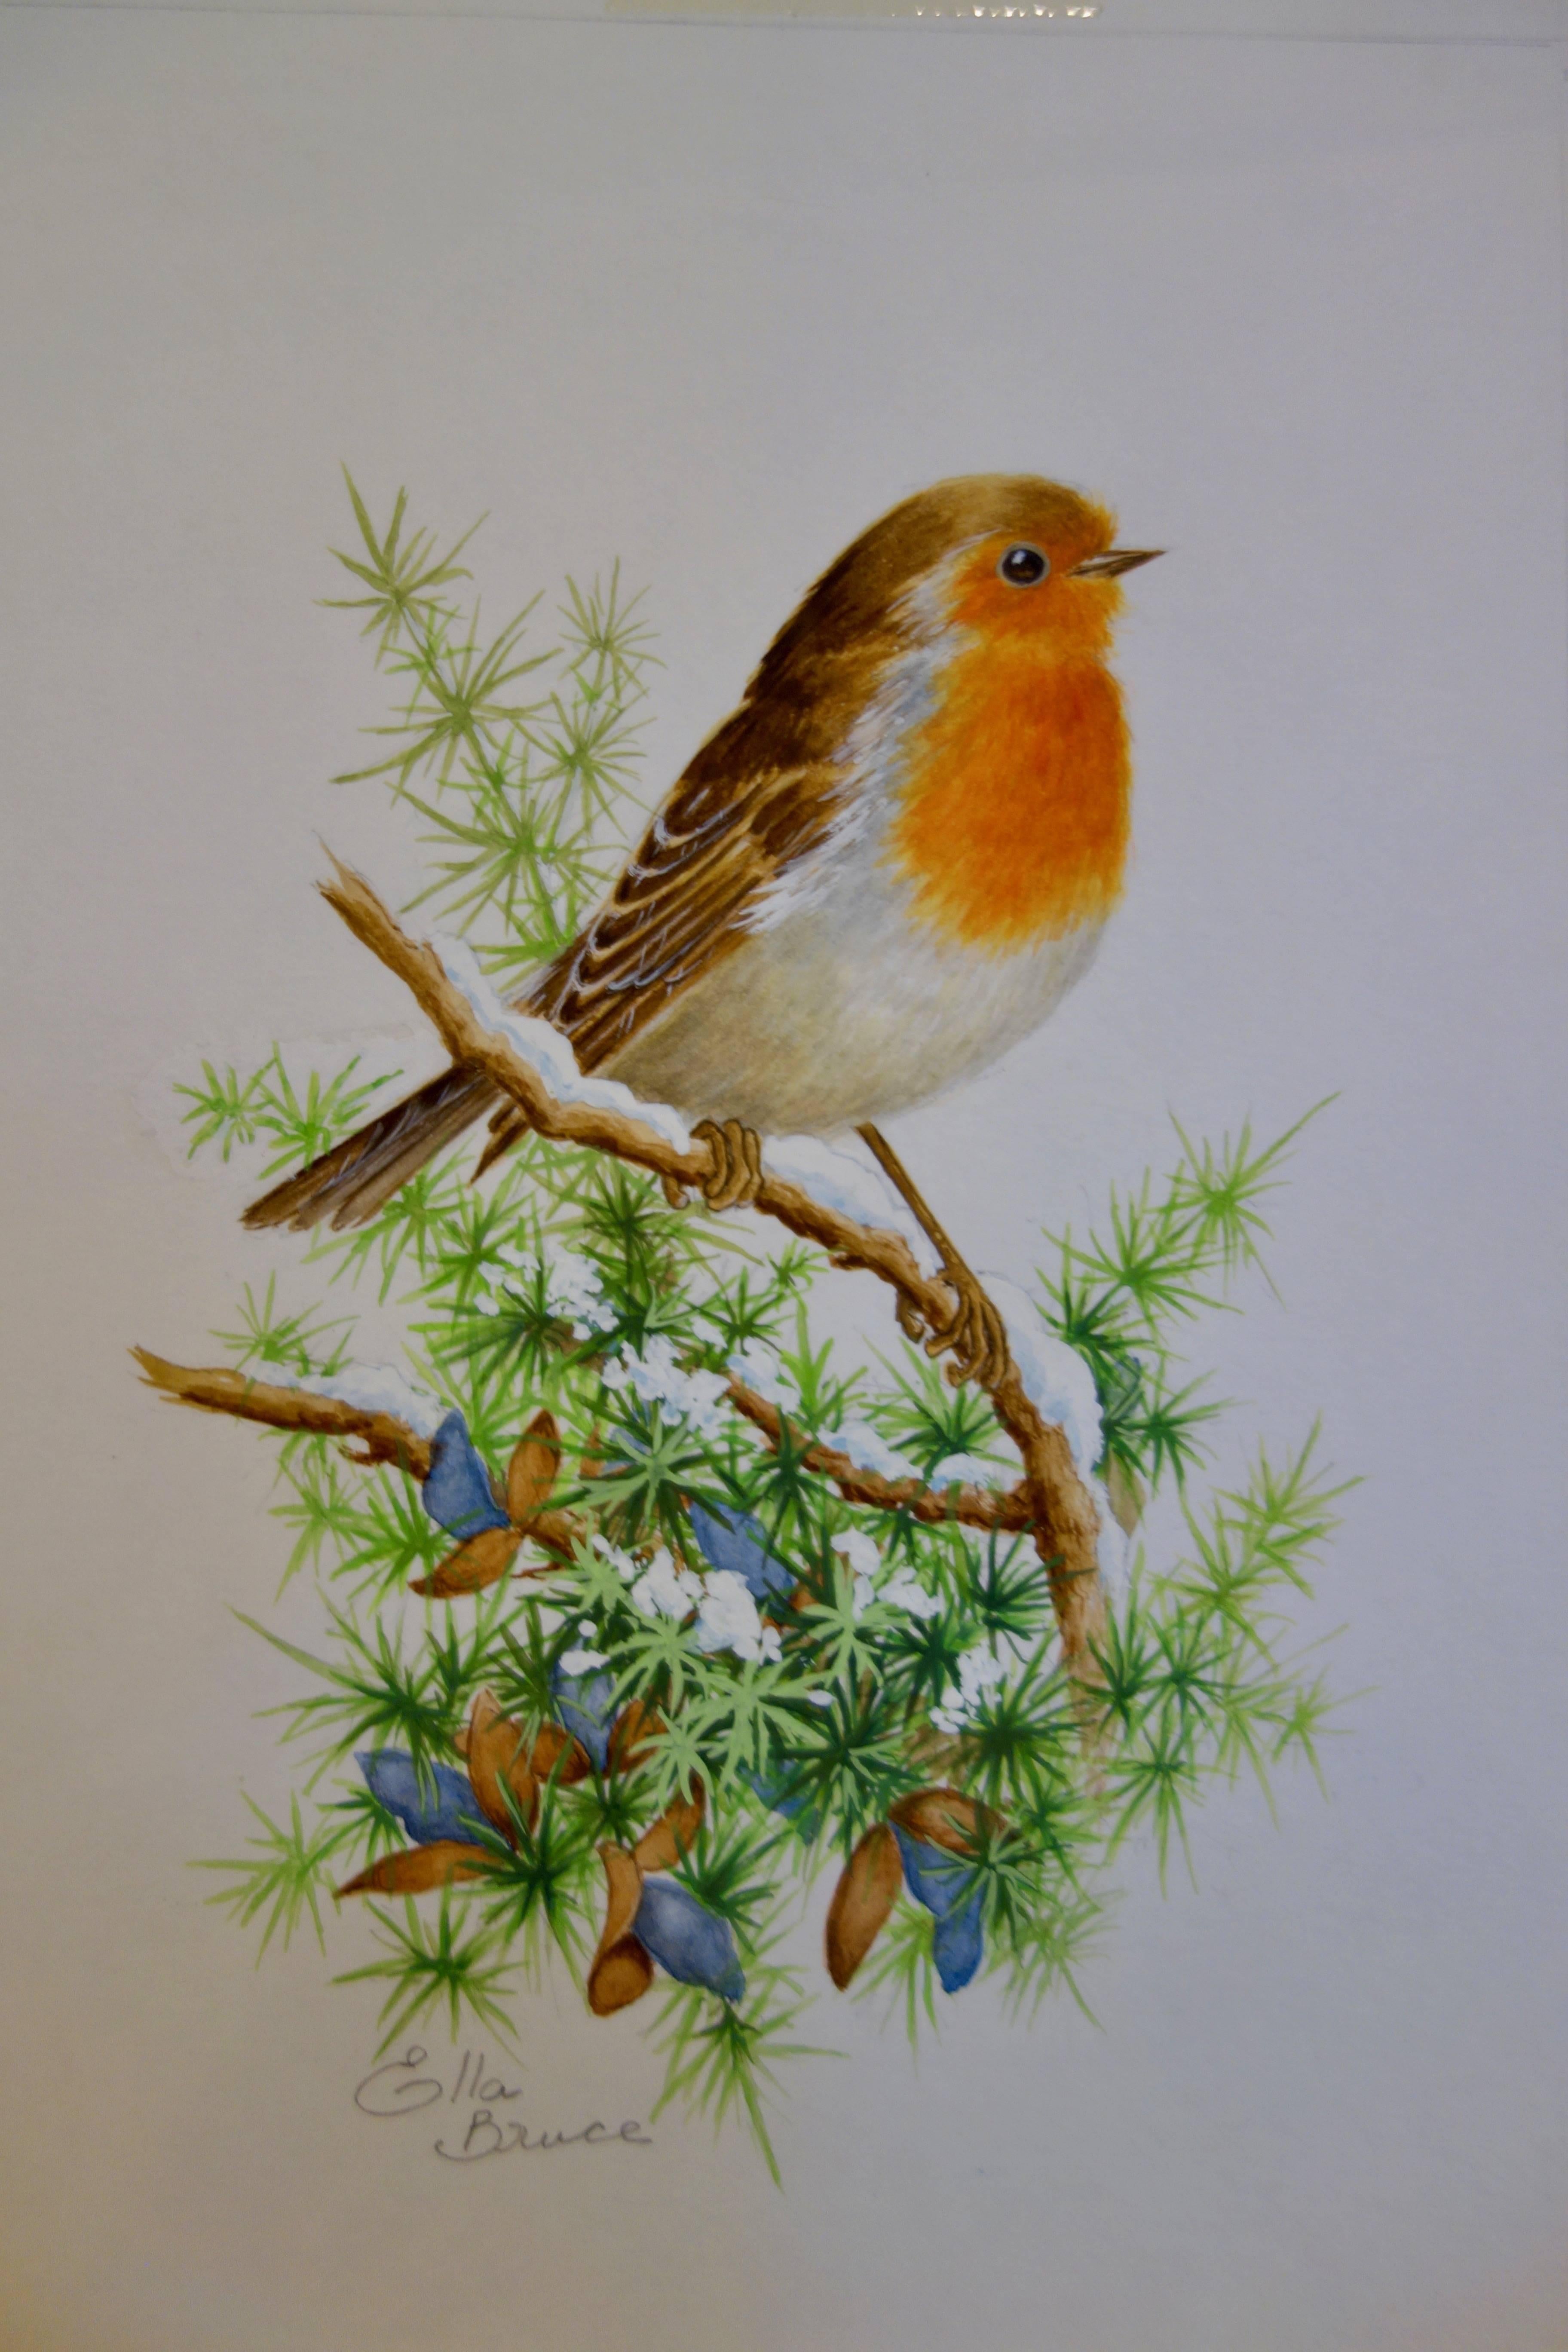 Ella Bruce Figurative Art - A Christmas Robin standing on a snow covered branch of a tree, English 